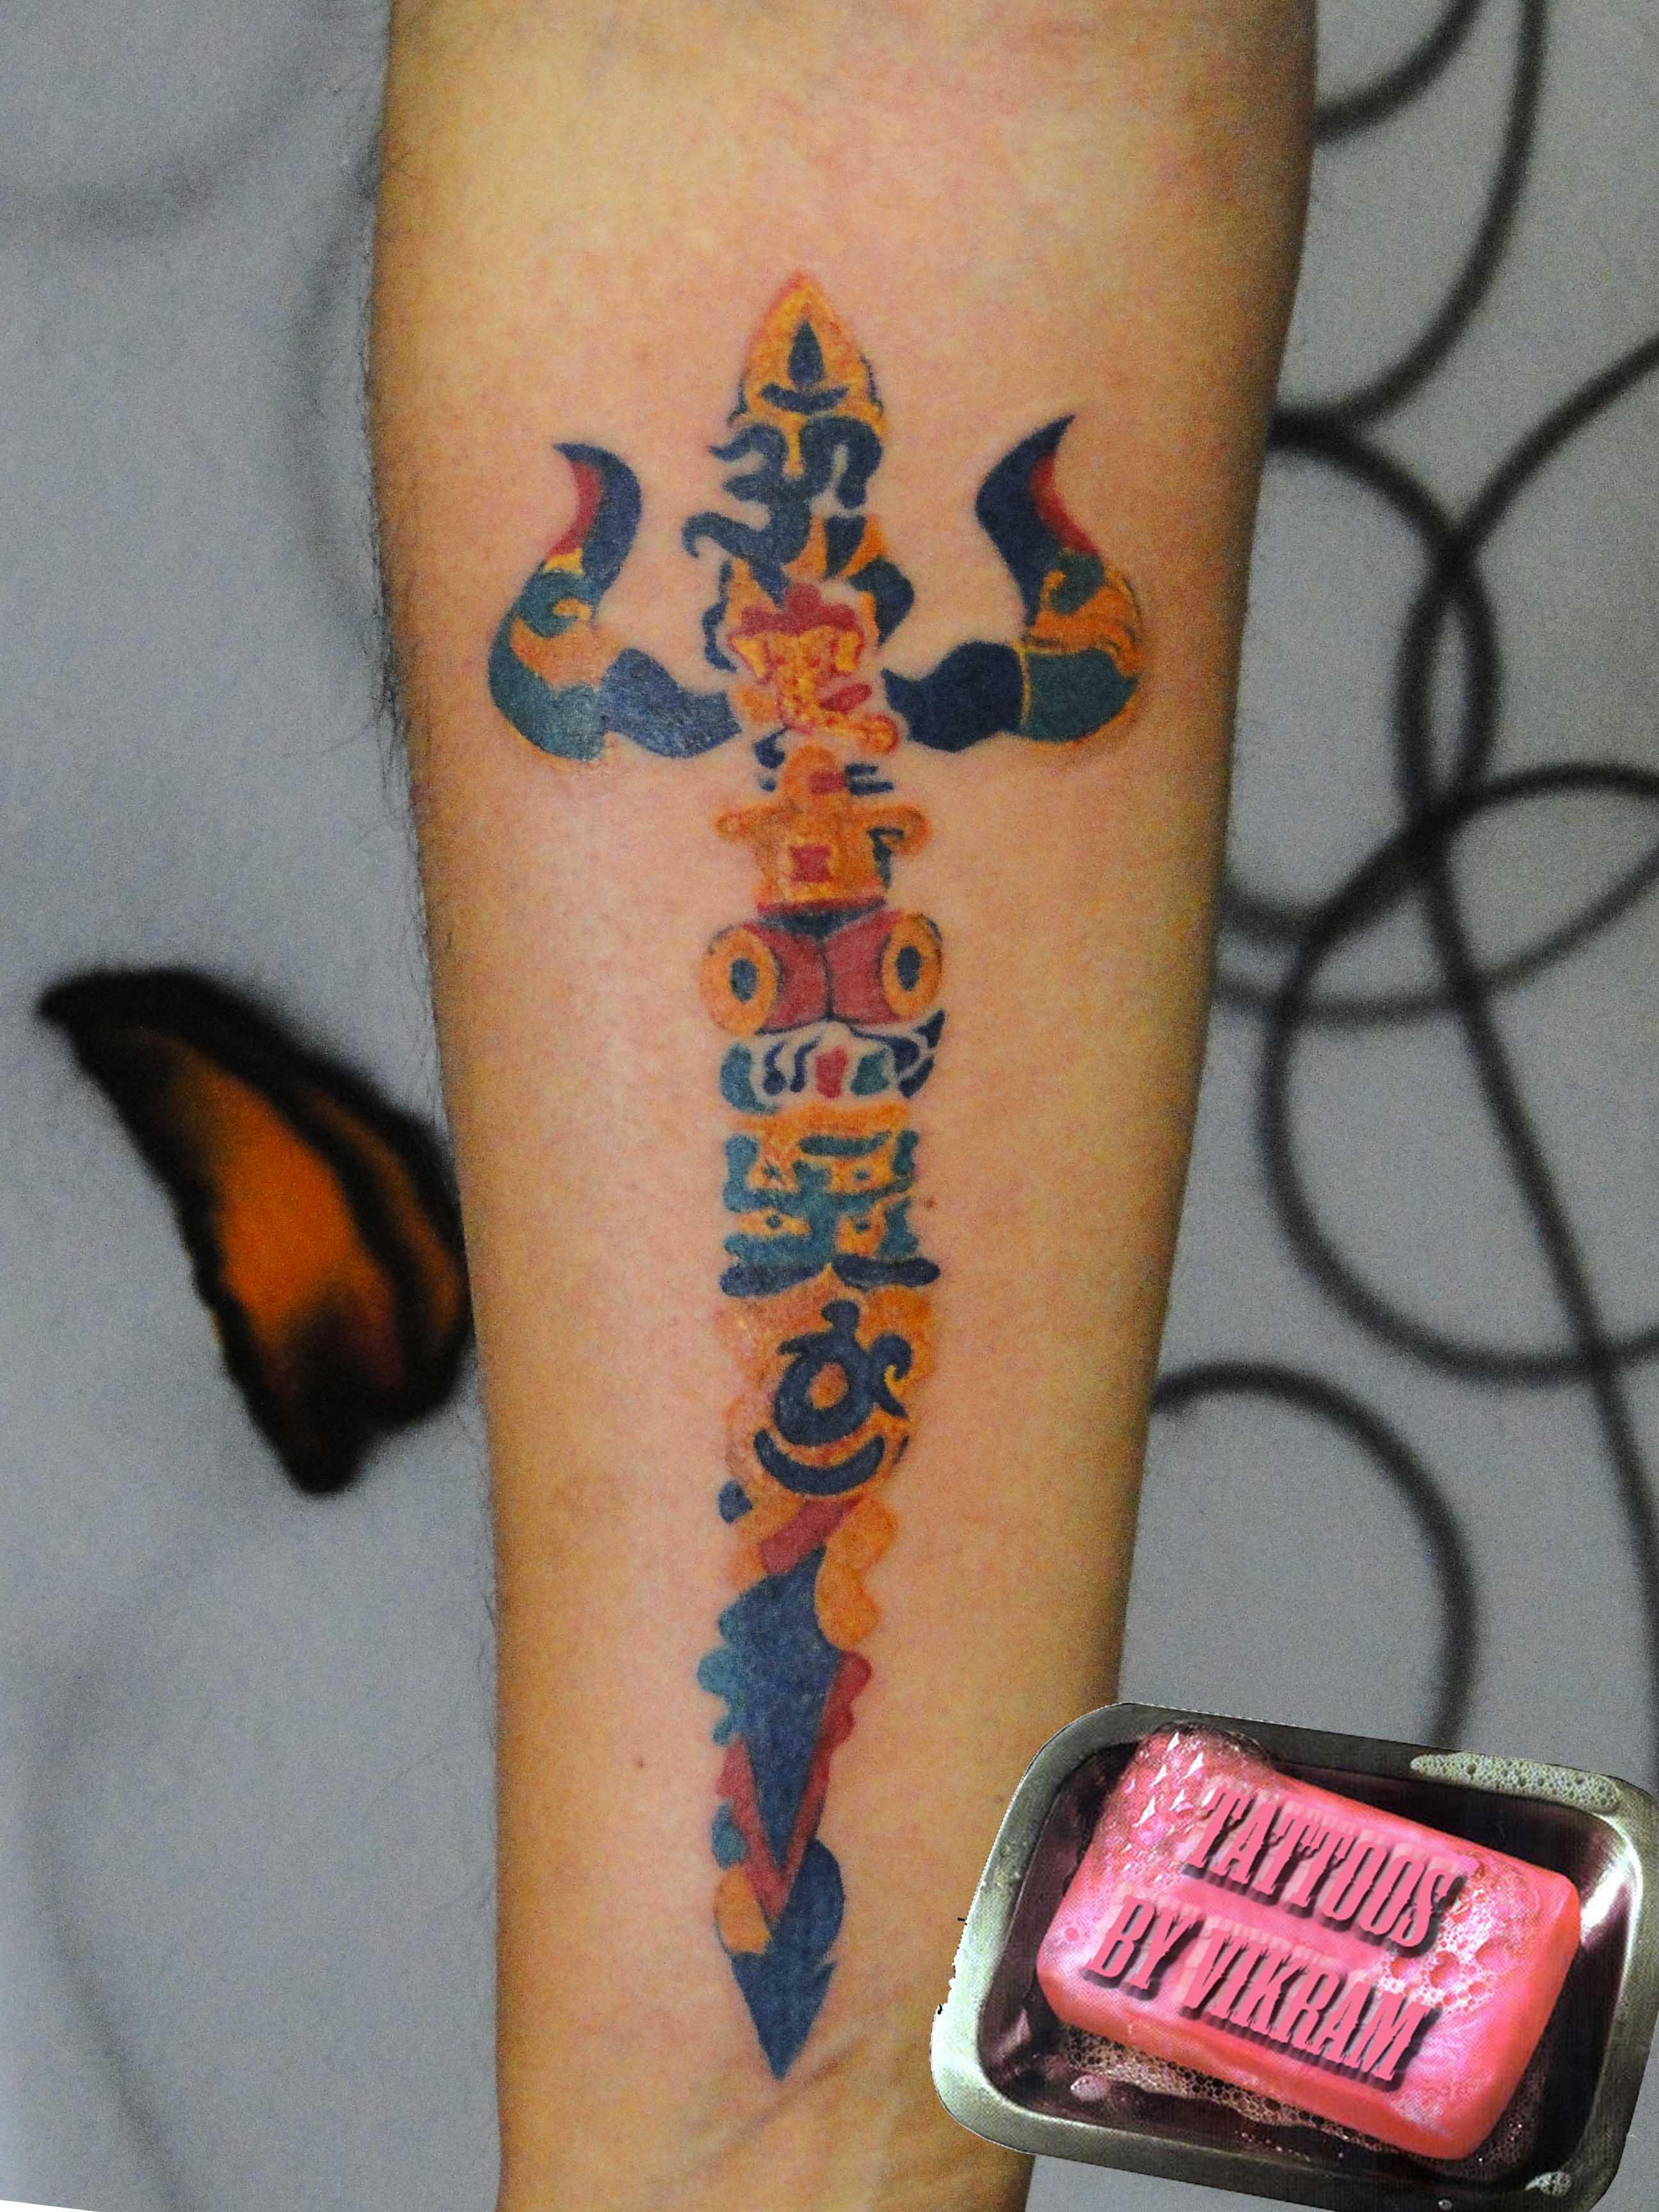 Unique Colorful Trishul Tattoo On Forearm By Vikram